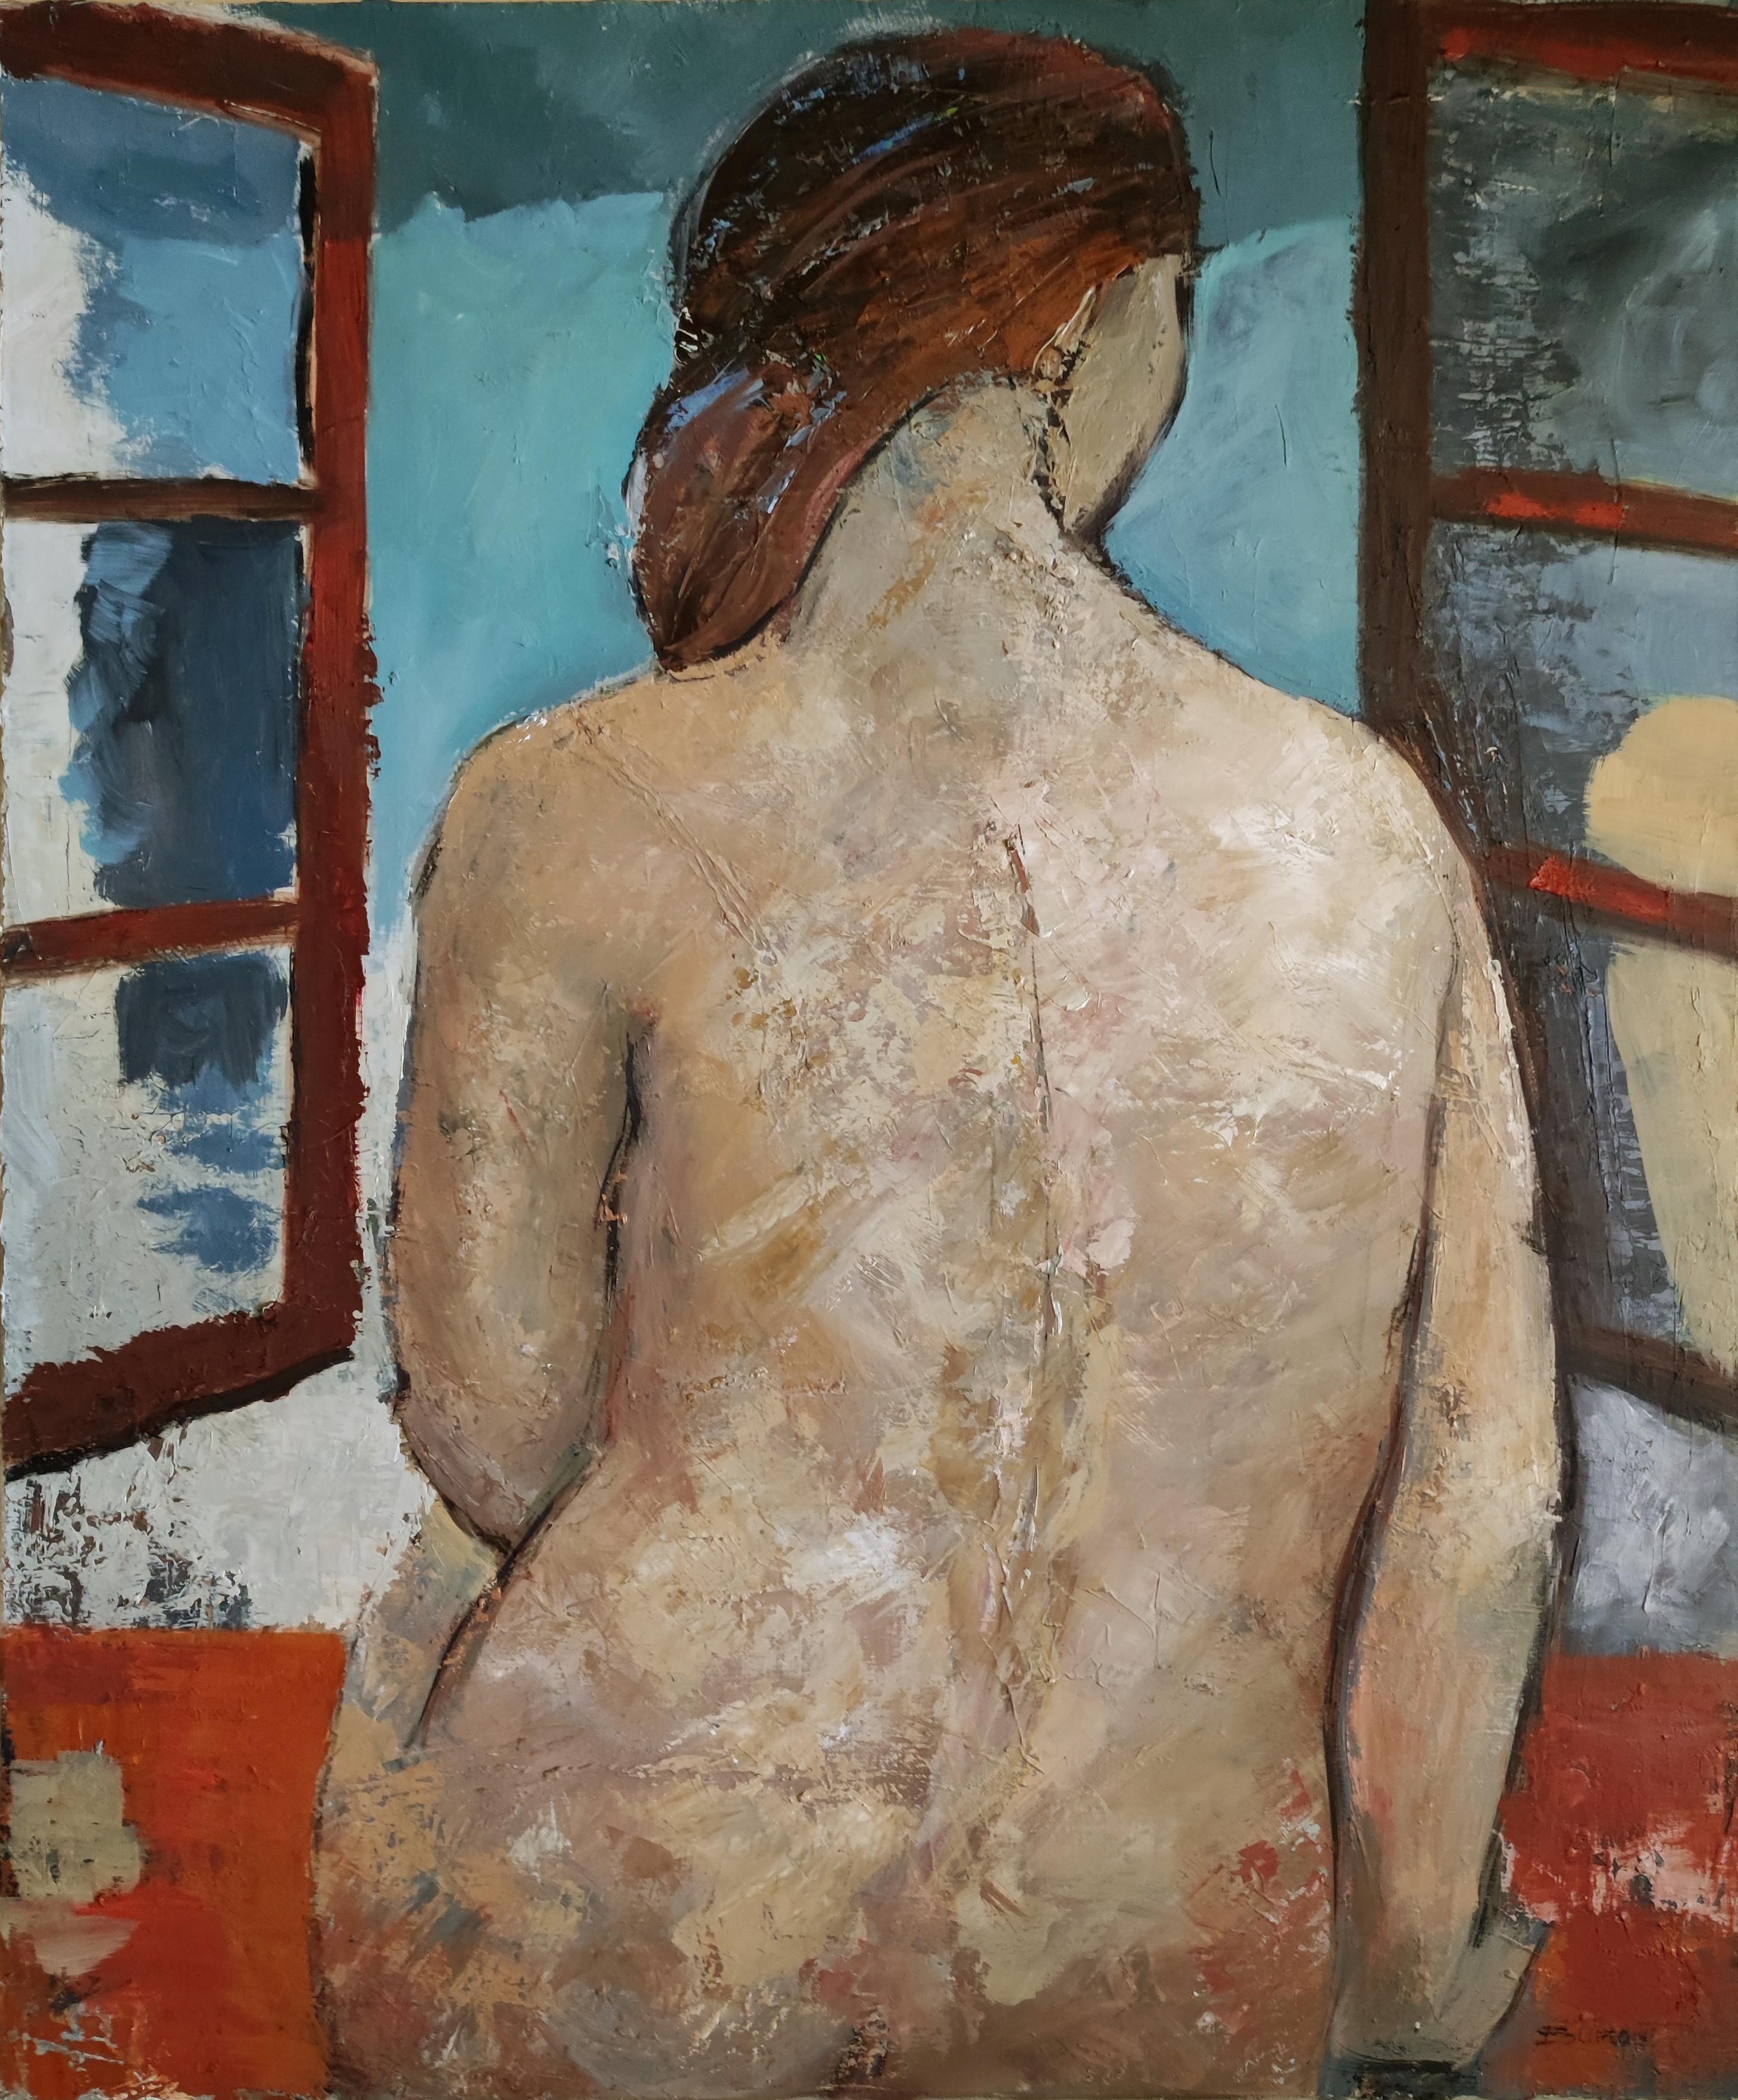 secrets thoughts, nude woman, figurative modern, oil on canvas, textured, France - Expressionist Painting by SOPHIE DUMONT